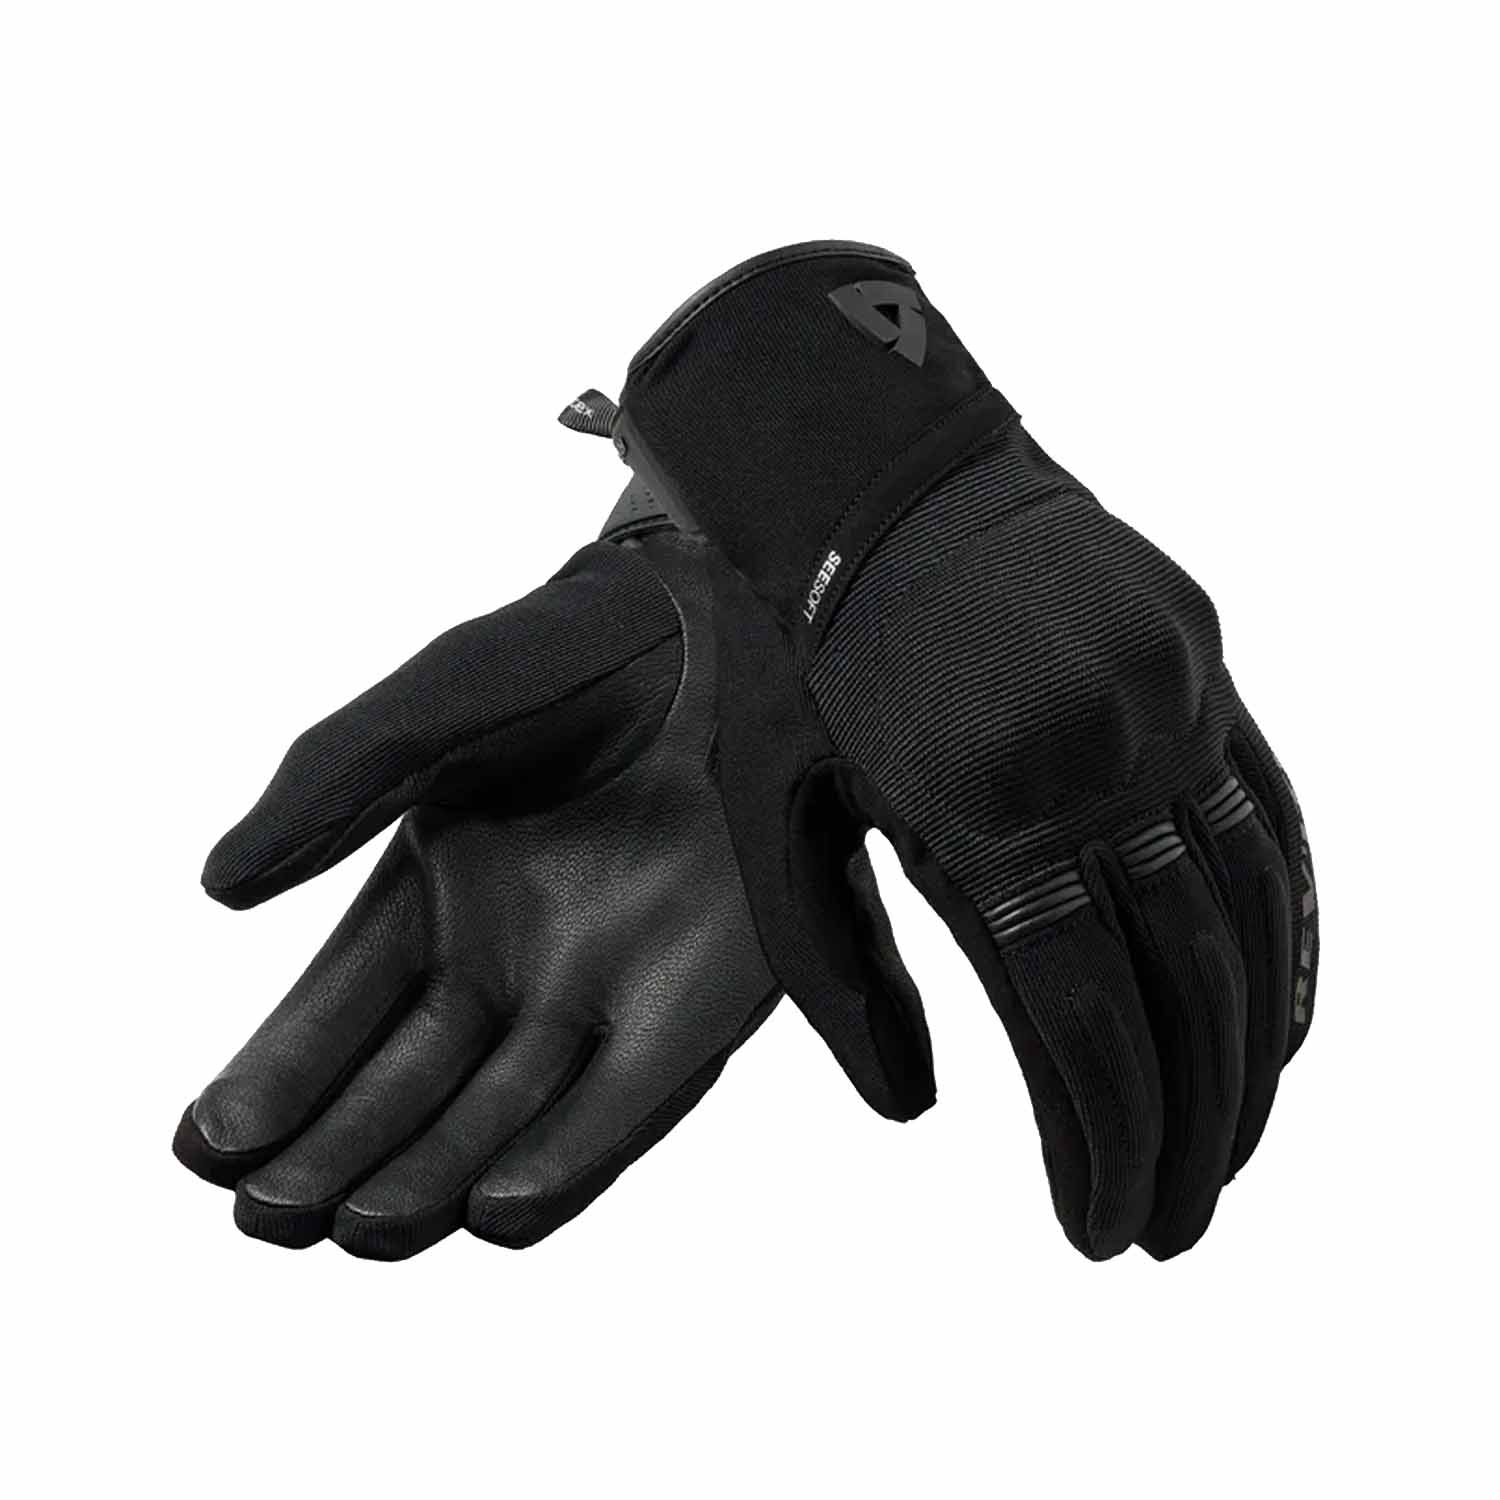 Image of REV'IT! Mosca 2 H2O Gloves Ladies Black Taille L